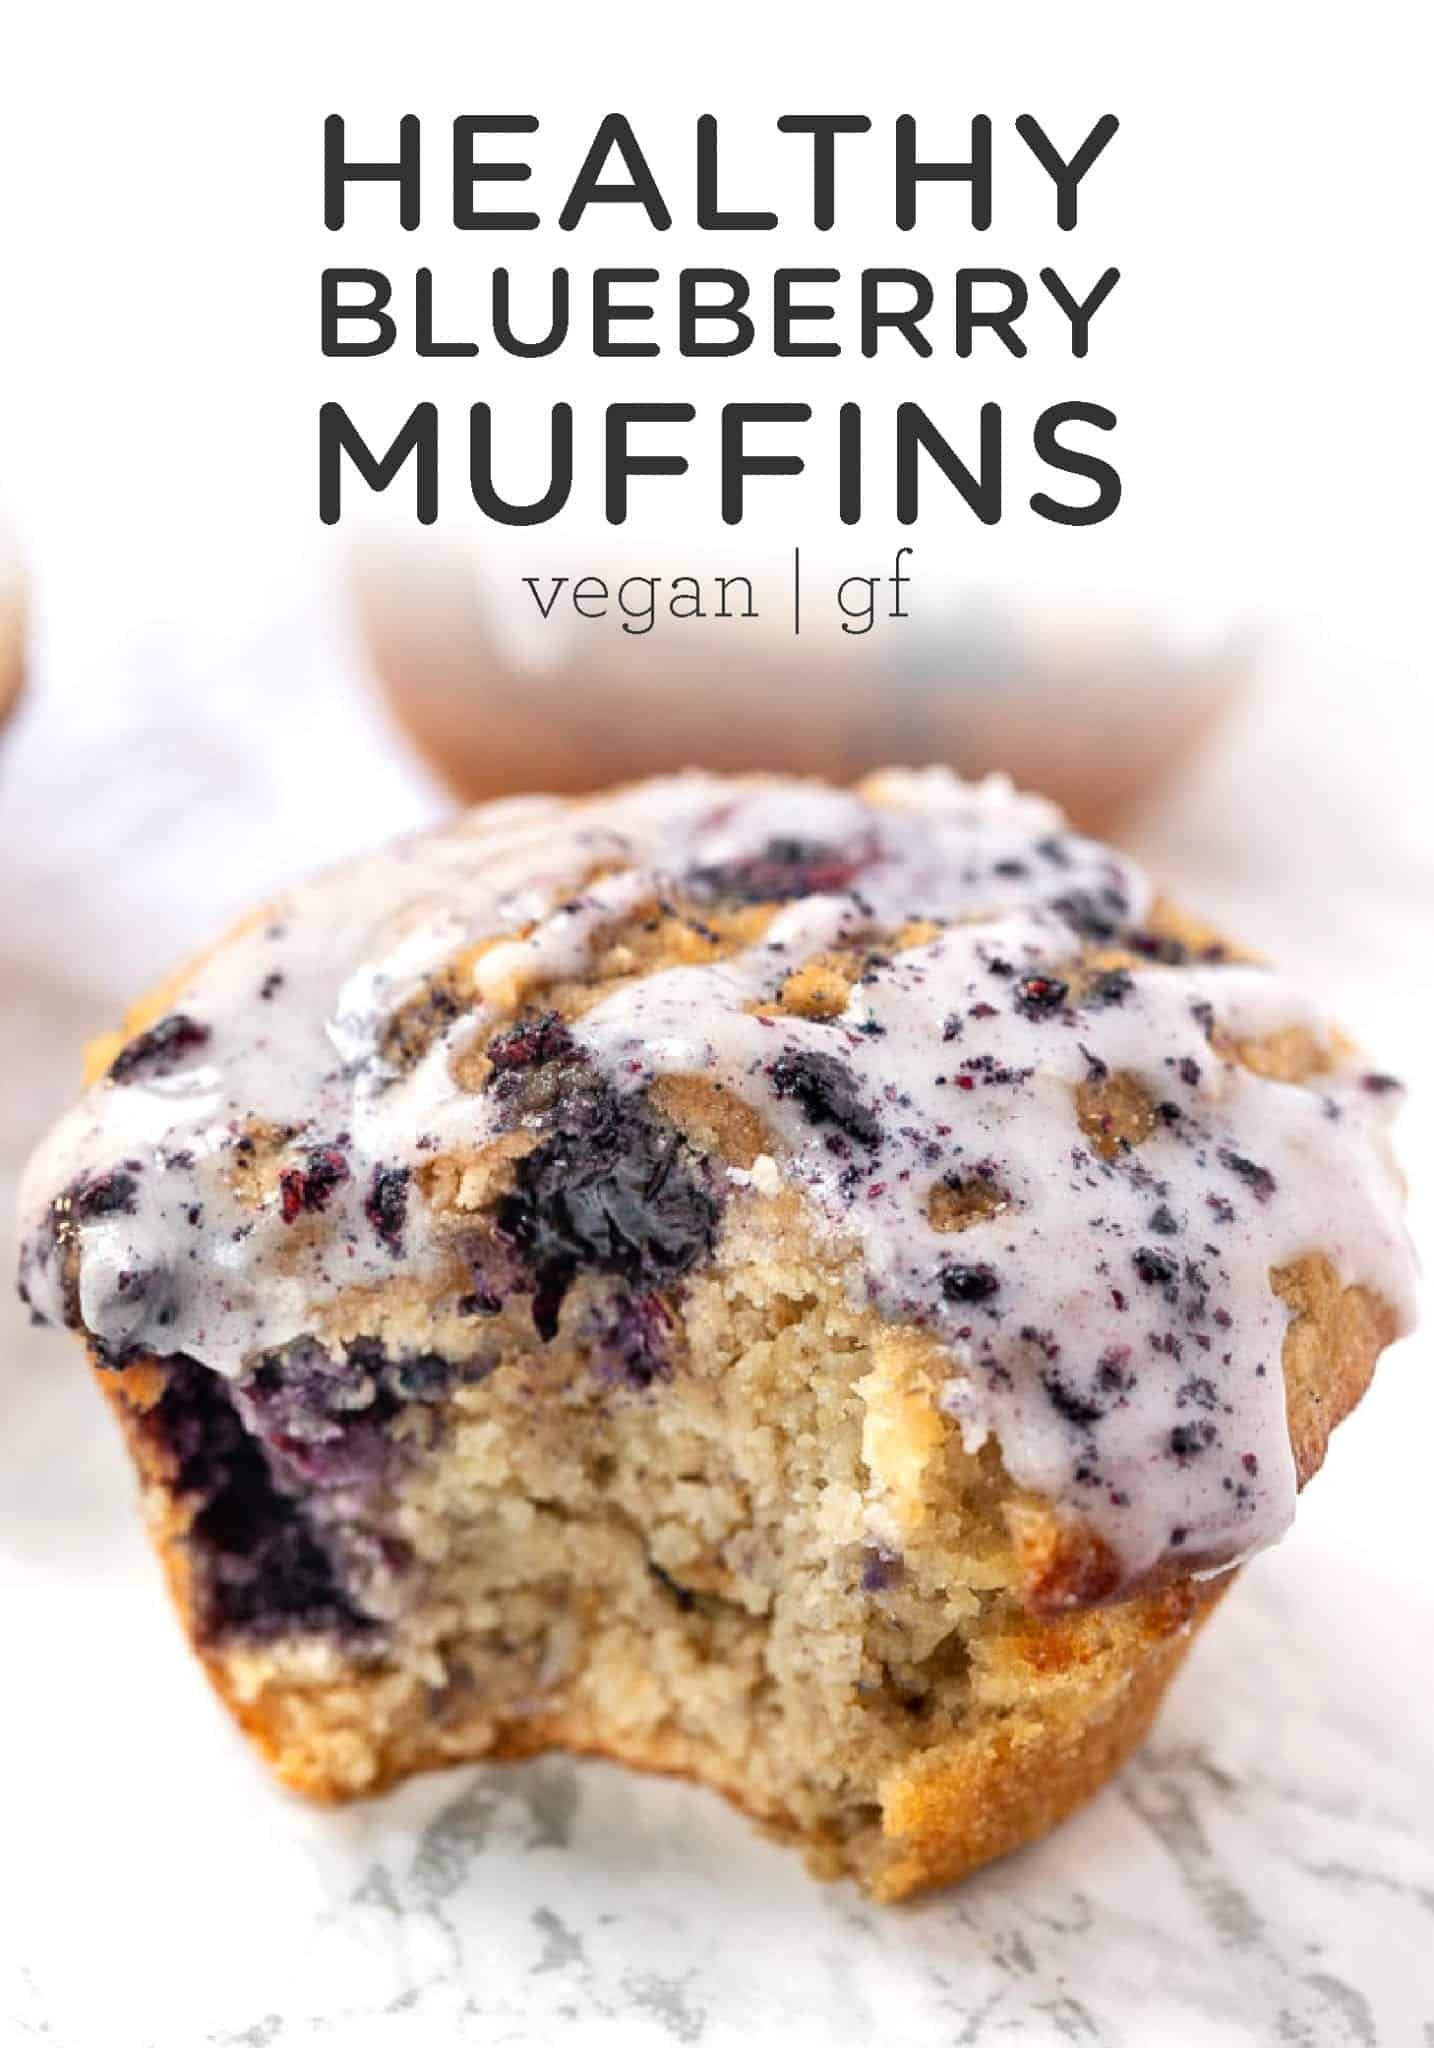 Healthy Blueberry Muffins with Blueberry Icing - Simply Quinoa